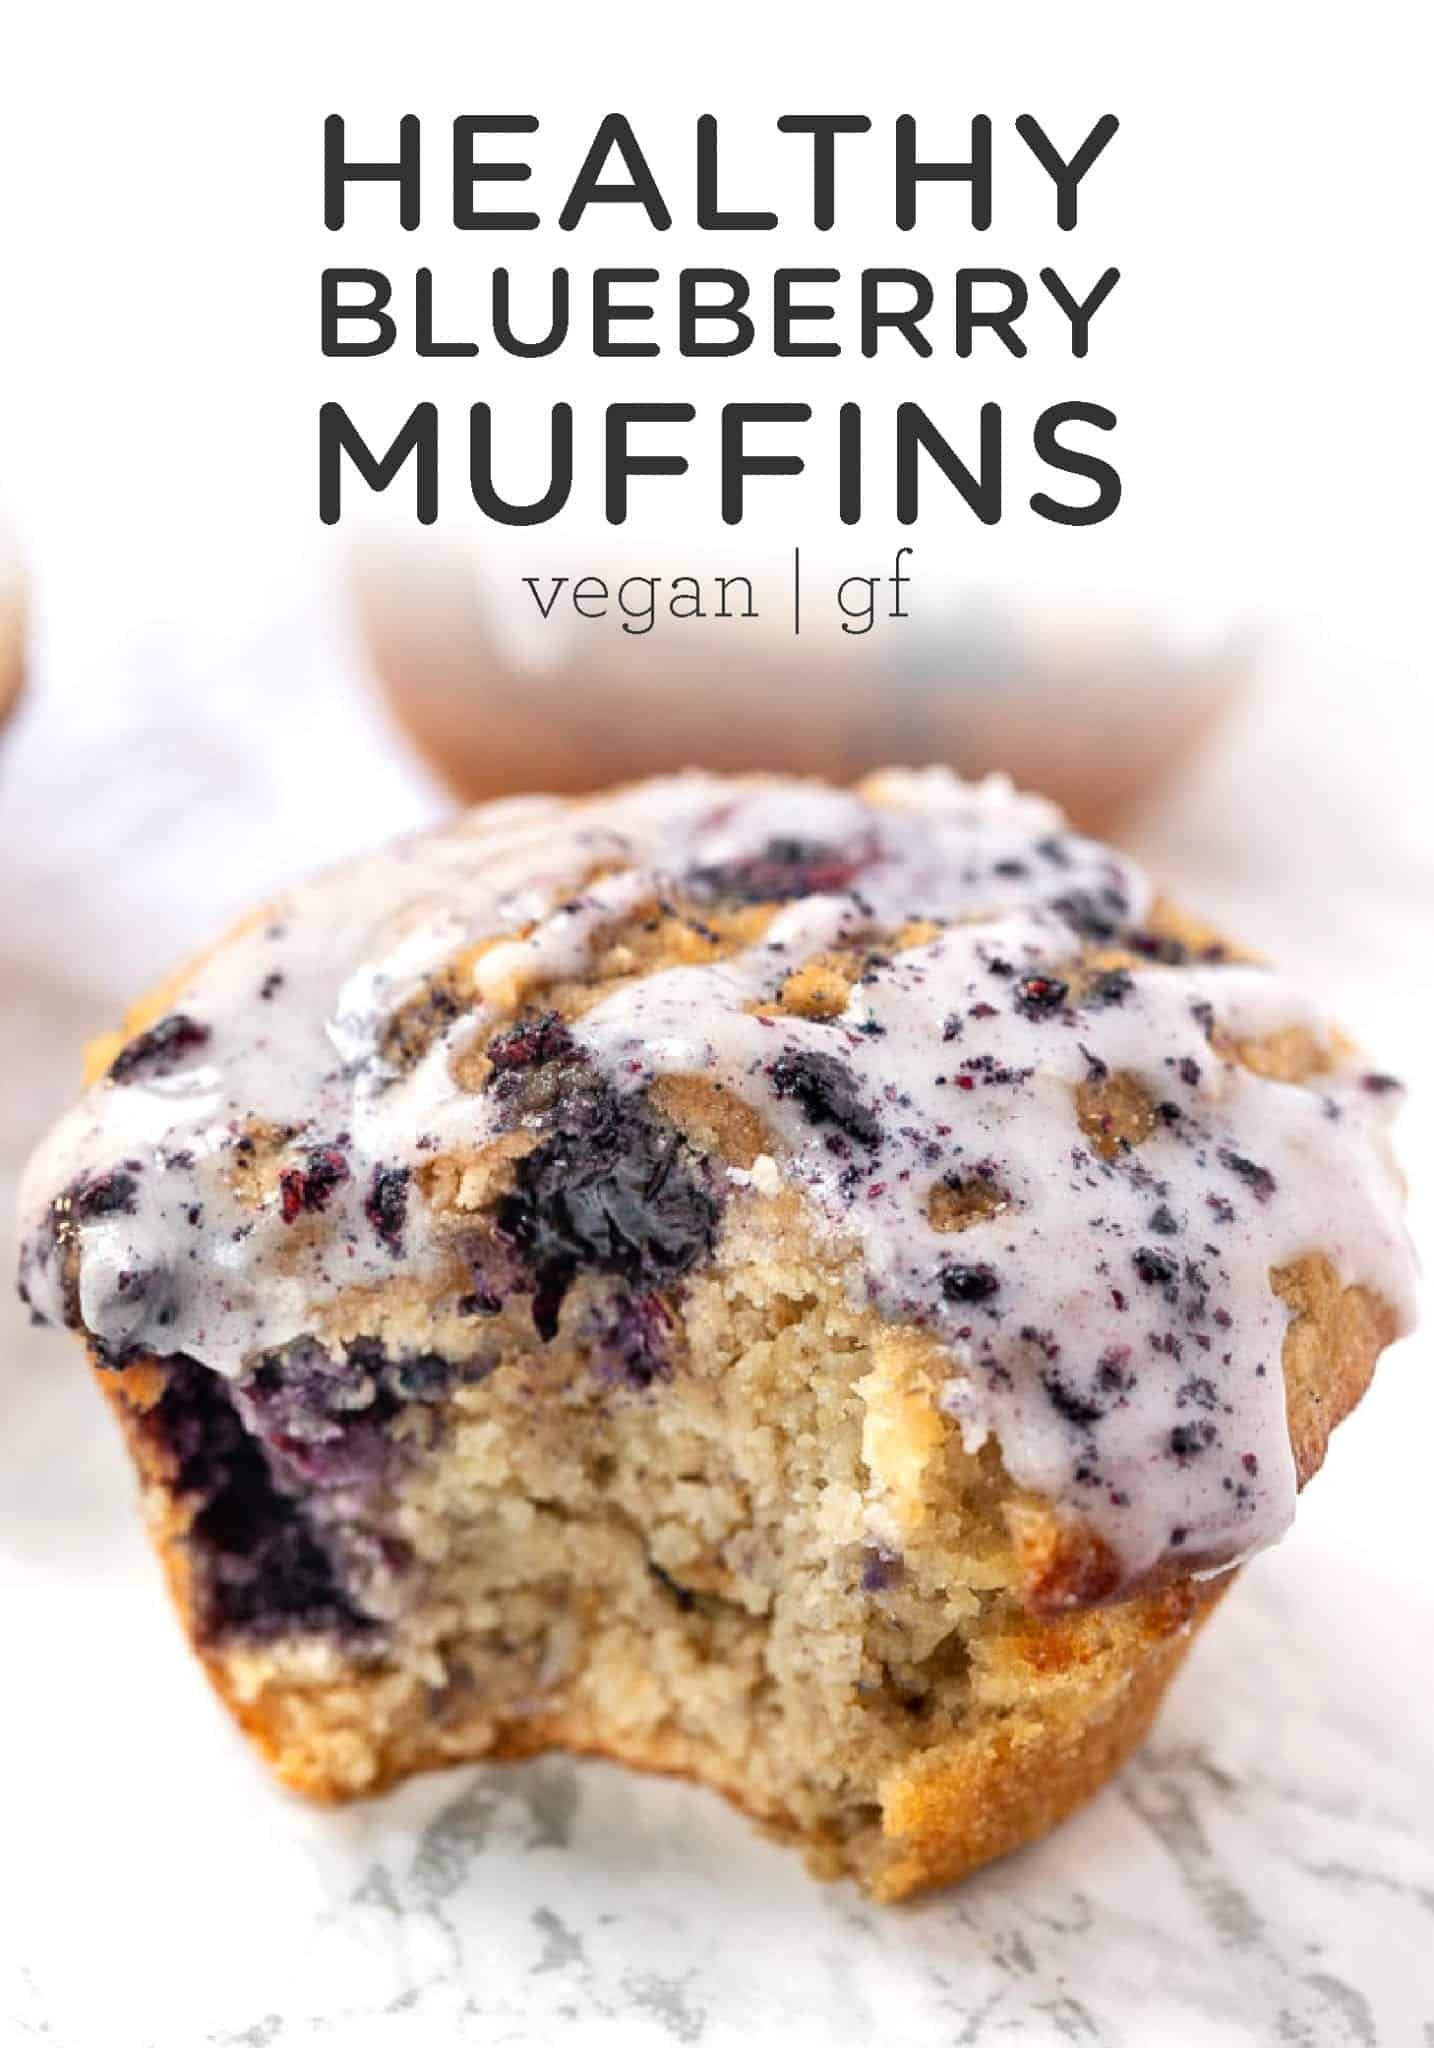 Healthy Blueberry Muffins with Blueberry Icing - Simply Quinoa